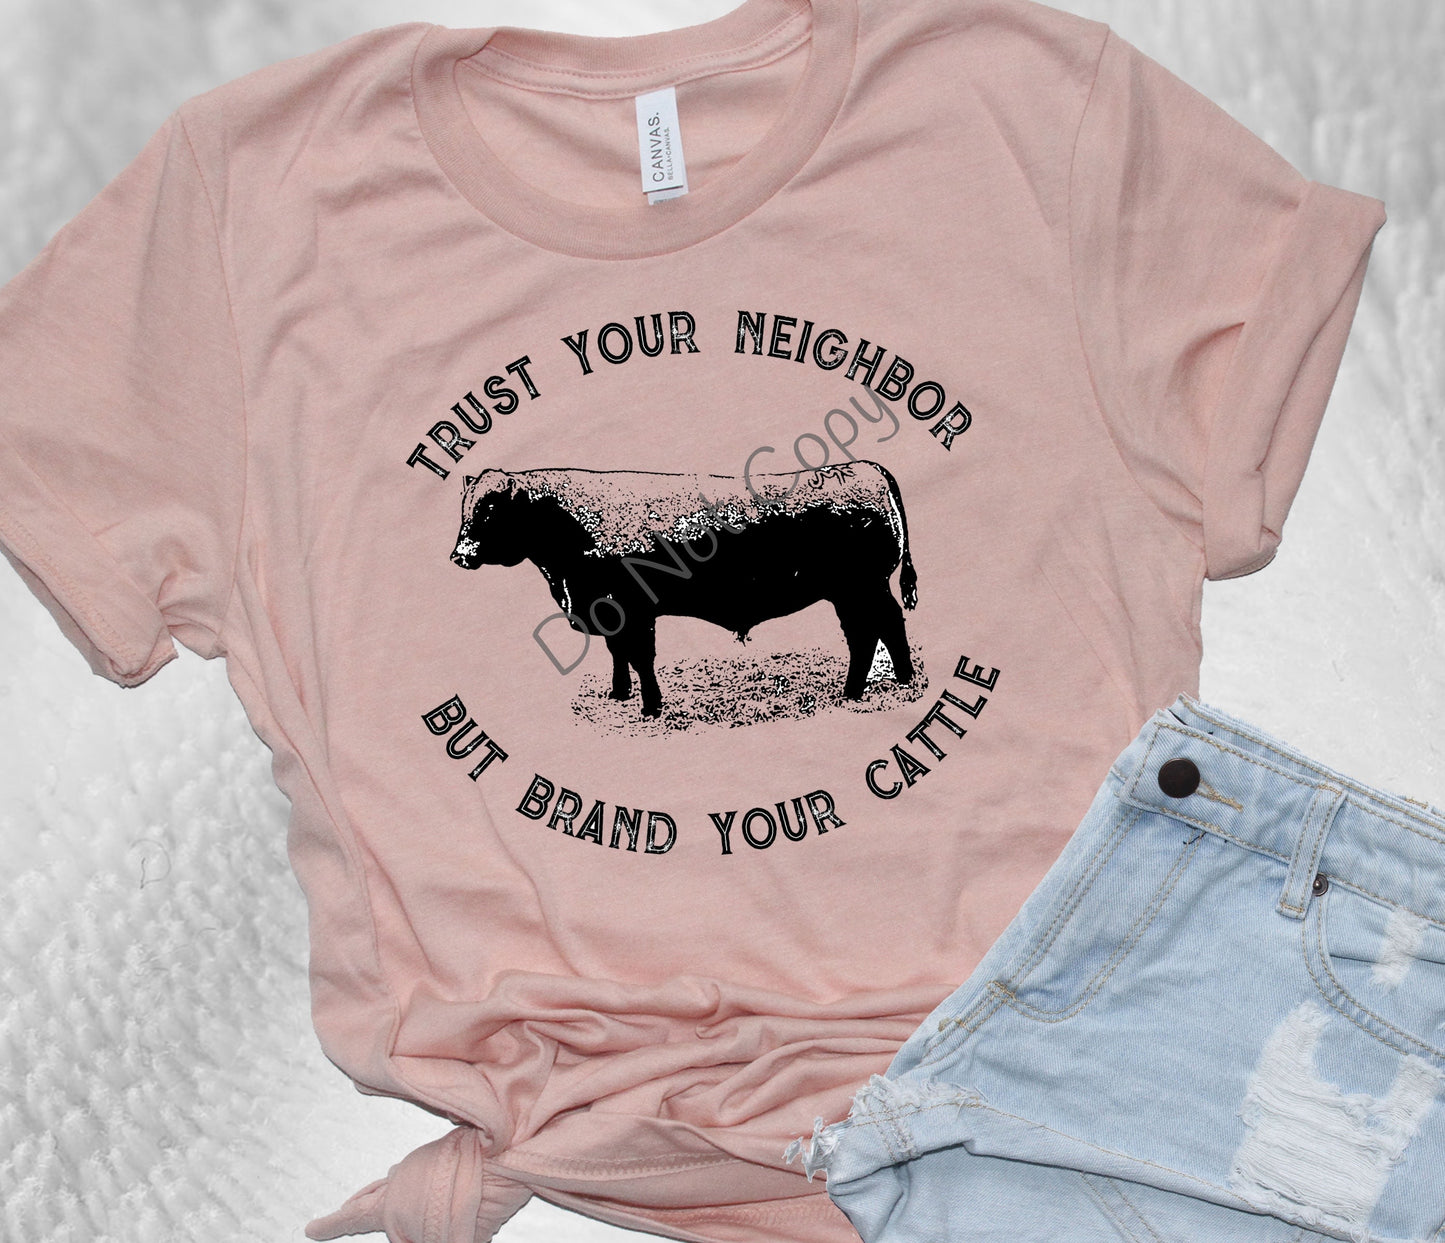 Trust your neighbor but brand your cattle  - DTF